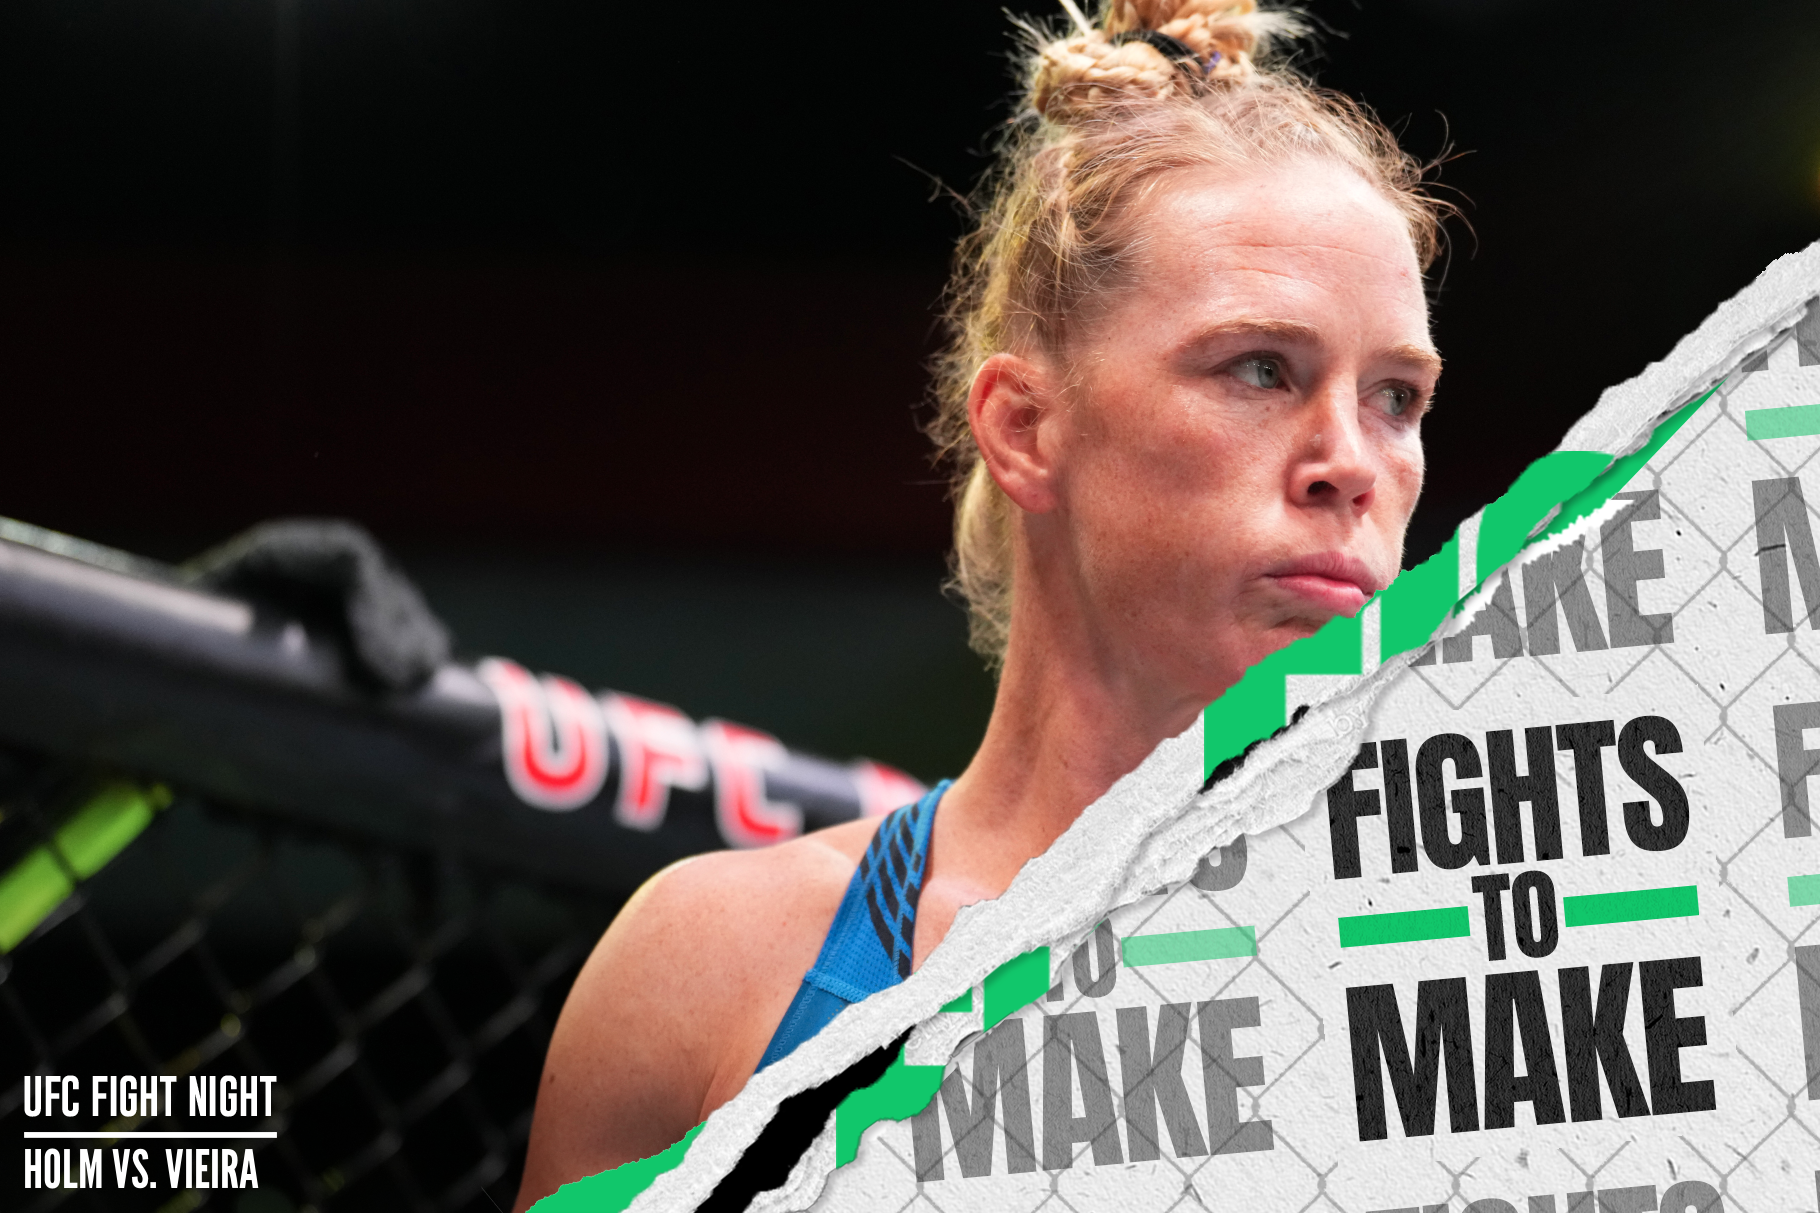 Holly Holm lost the UFC Vegas 55 main event to Ketlen Vieira.